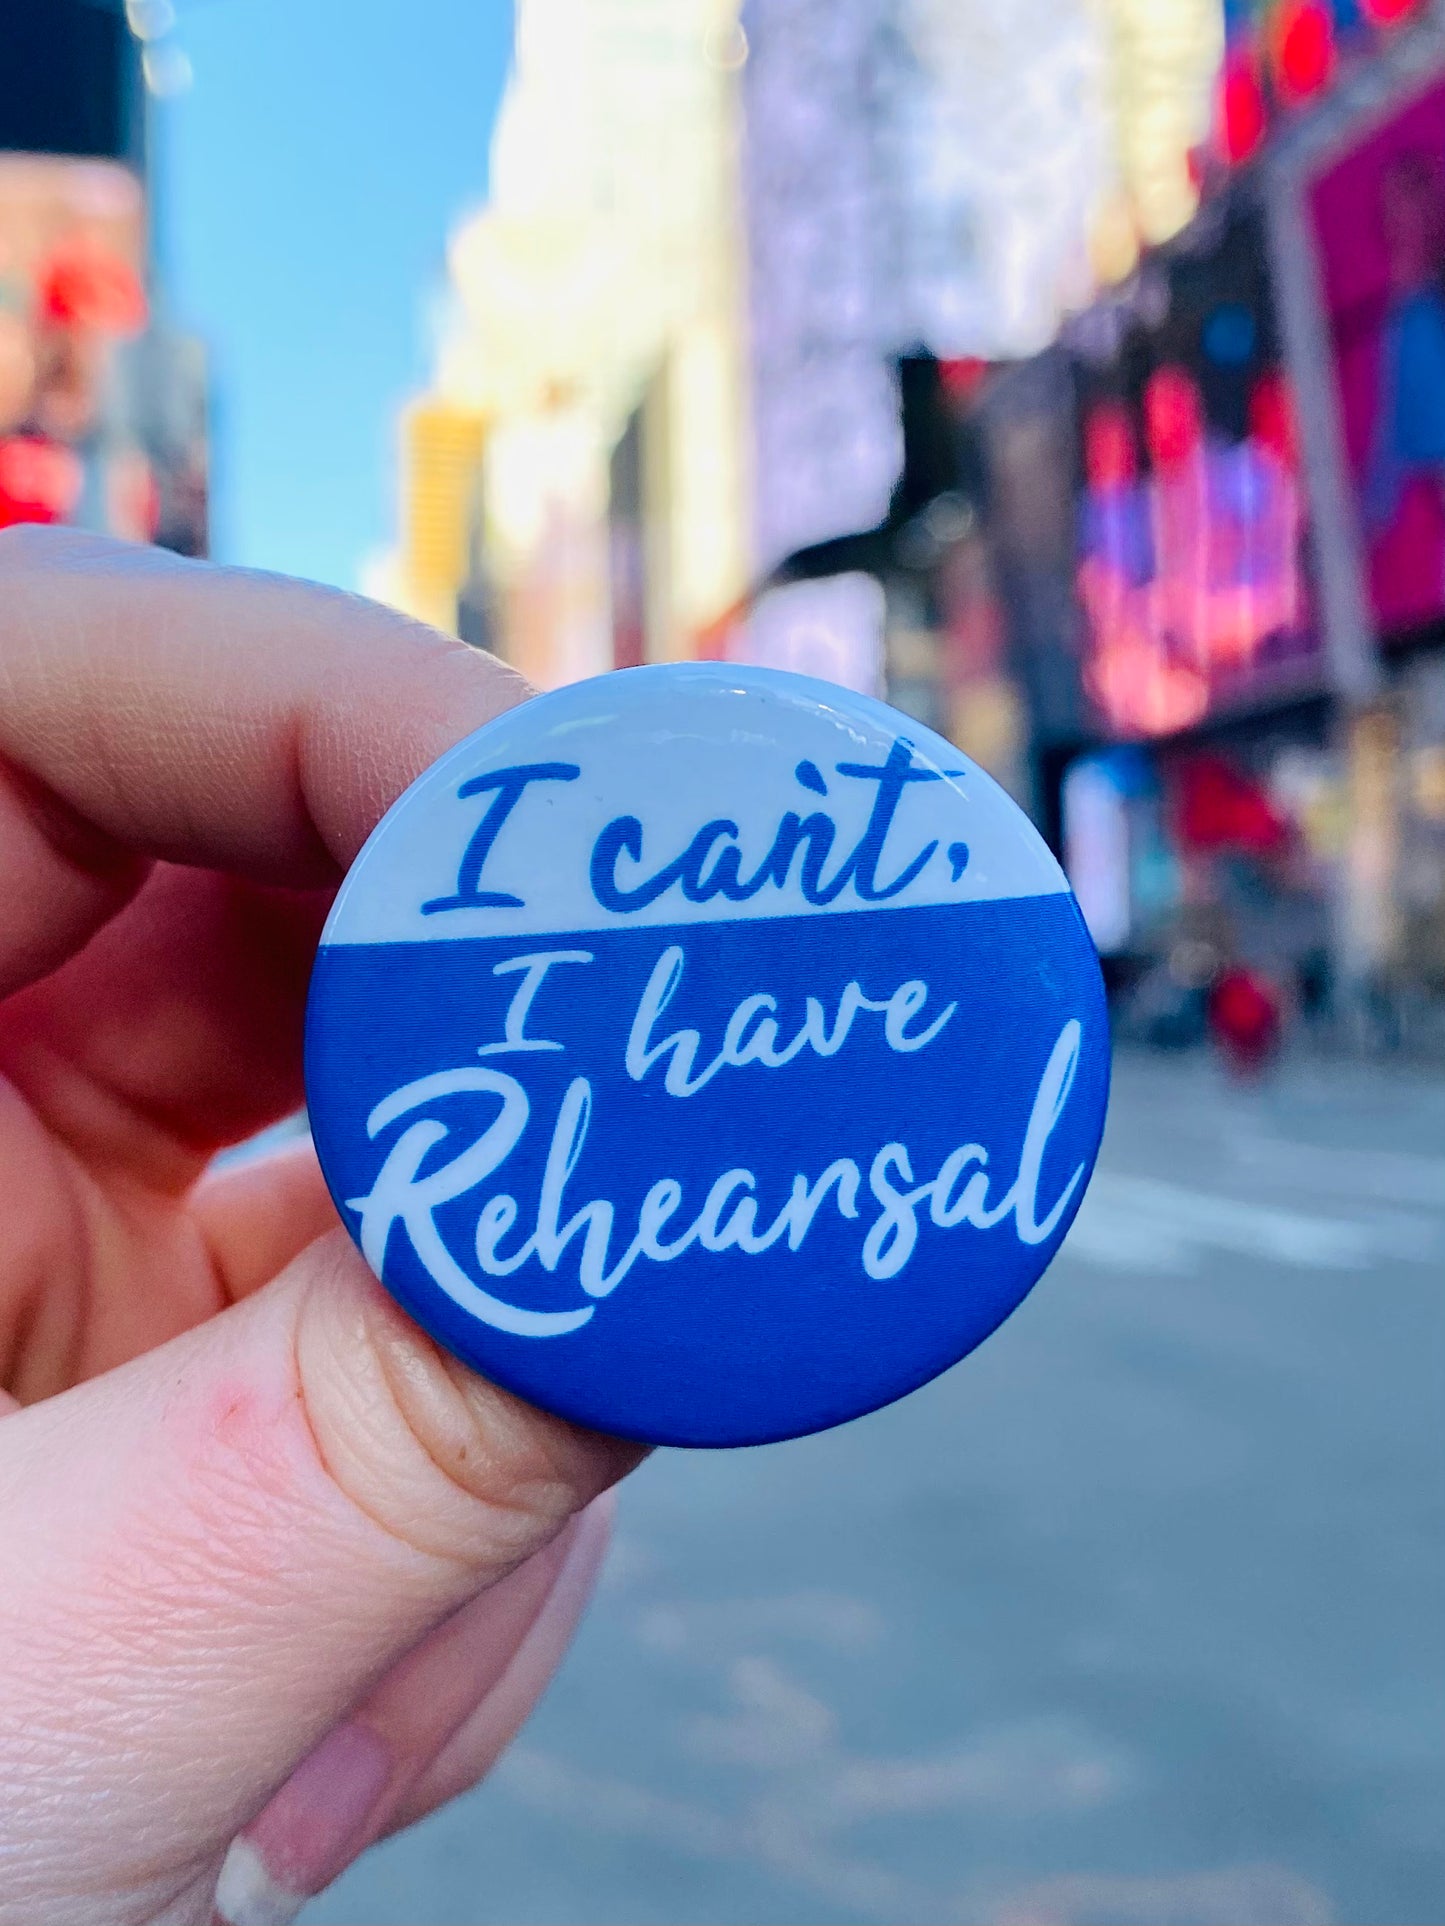 I Can't, I Have Rehearsal Button